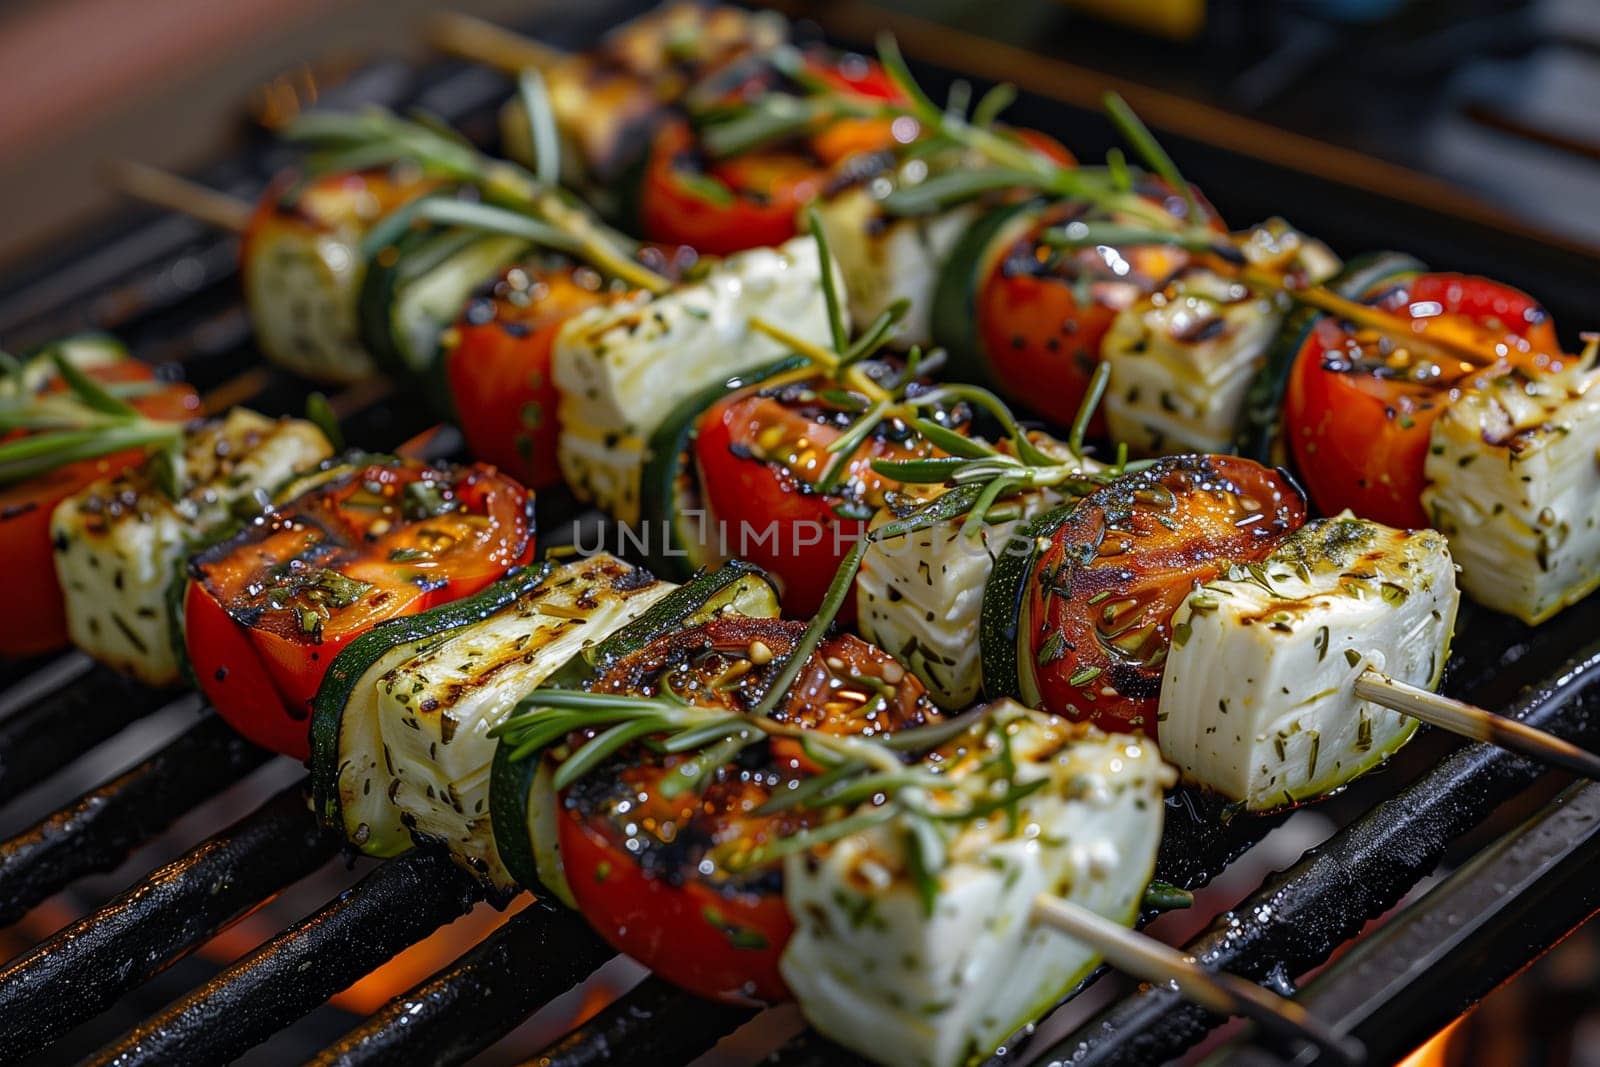 Grilled vegetarian grill skewers, tomato, sheep cheese and zucchini slices, rosemary garlic oil. Close-up